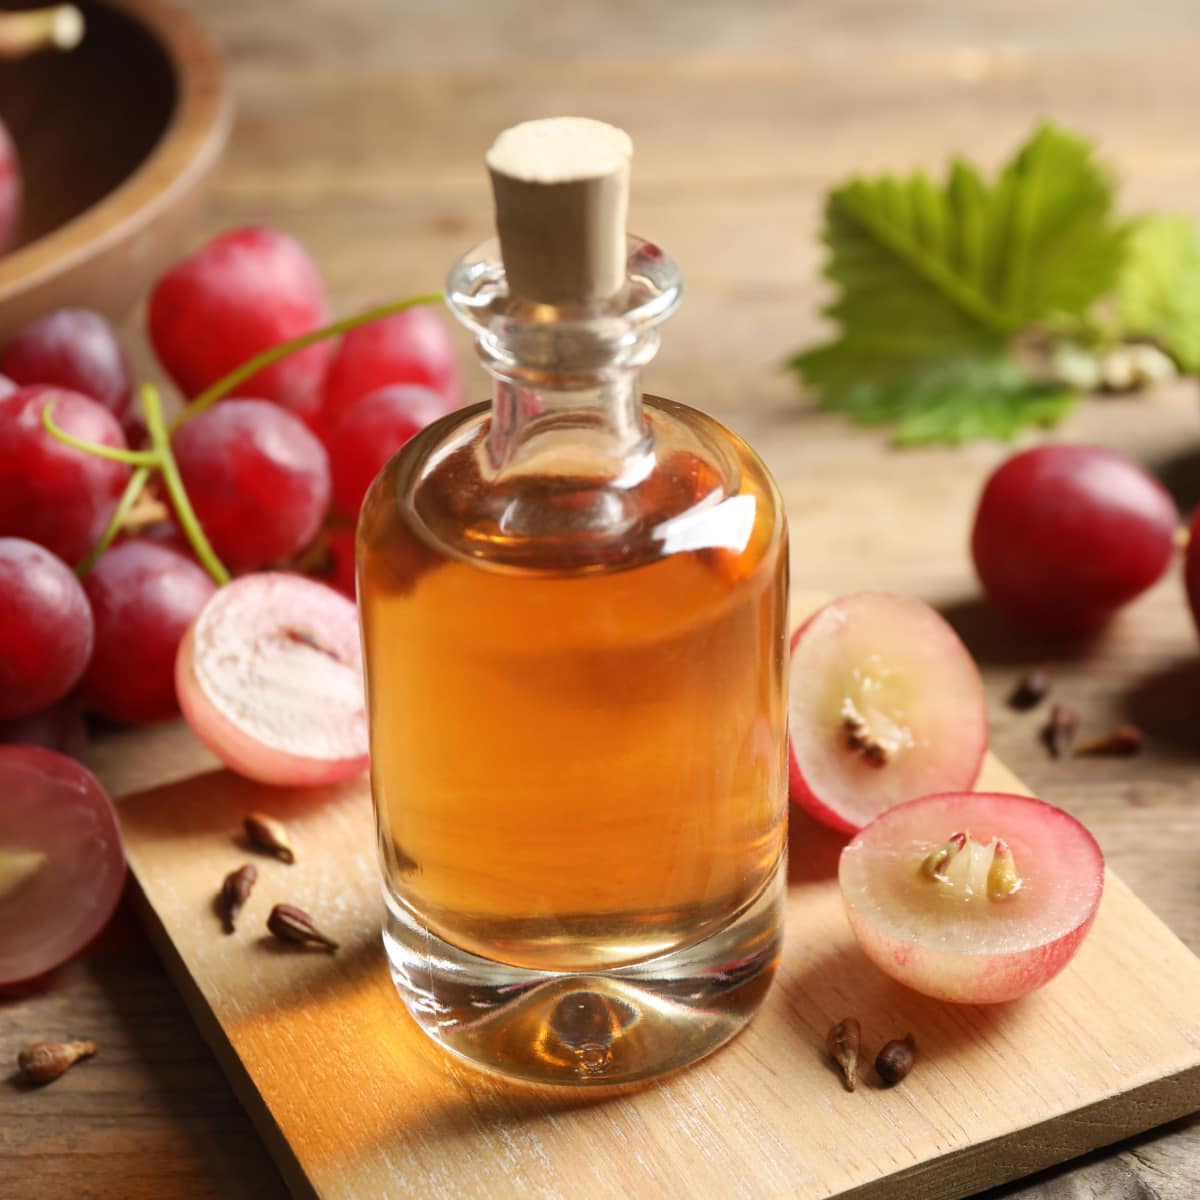 A Bottle of Grapeseed Oil and Fresh Grapes on a Wooden Board